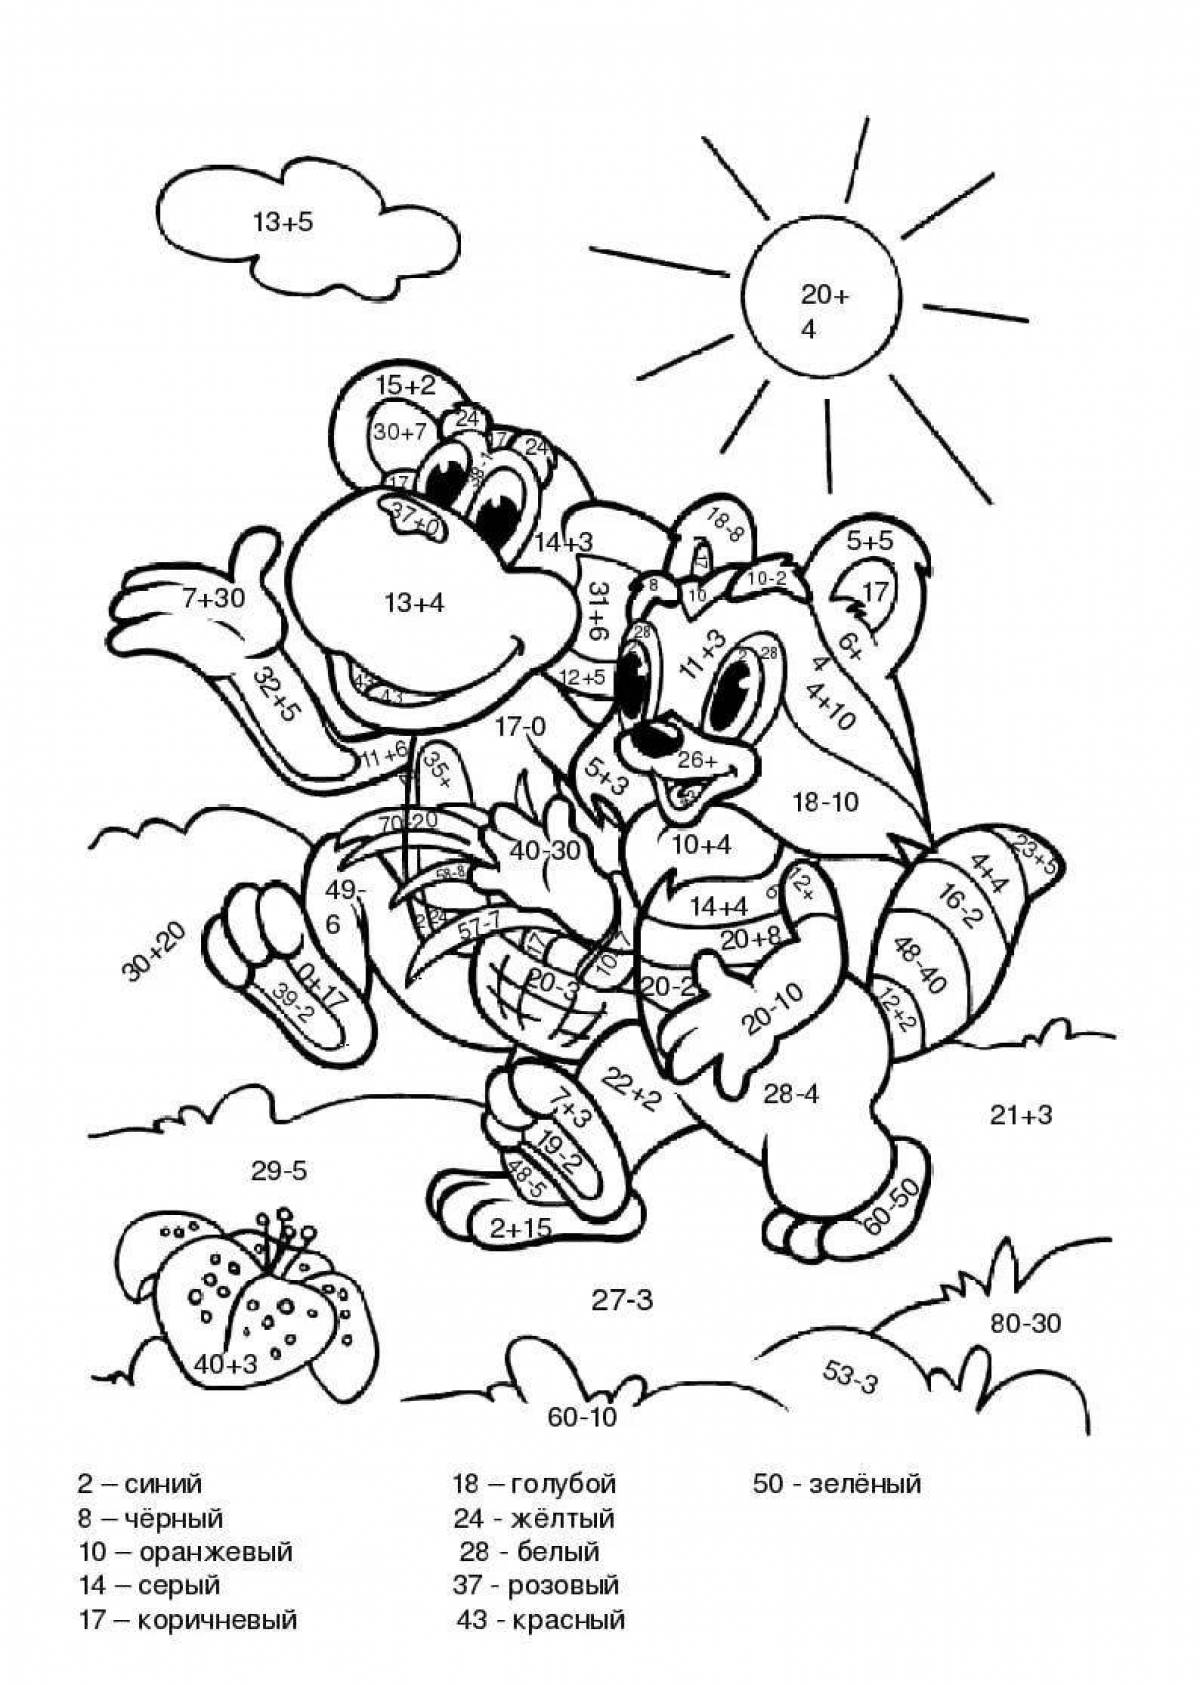 A wonderful coloring book for math grade 2 addition and subtraction within 20